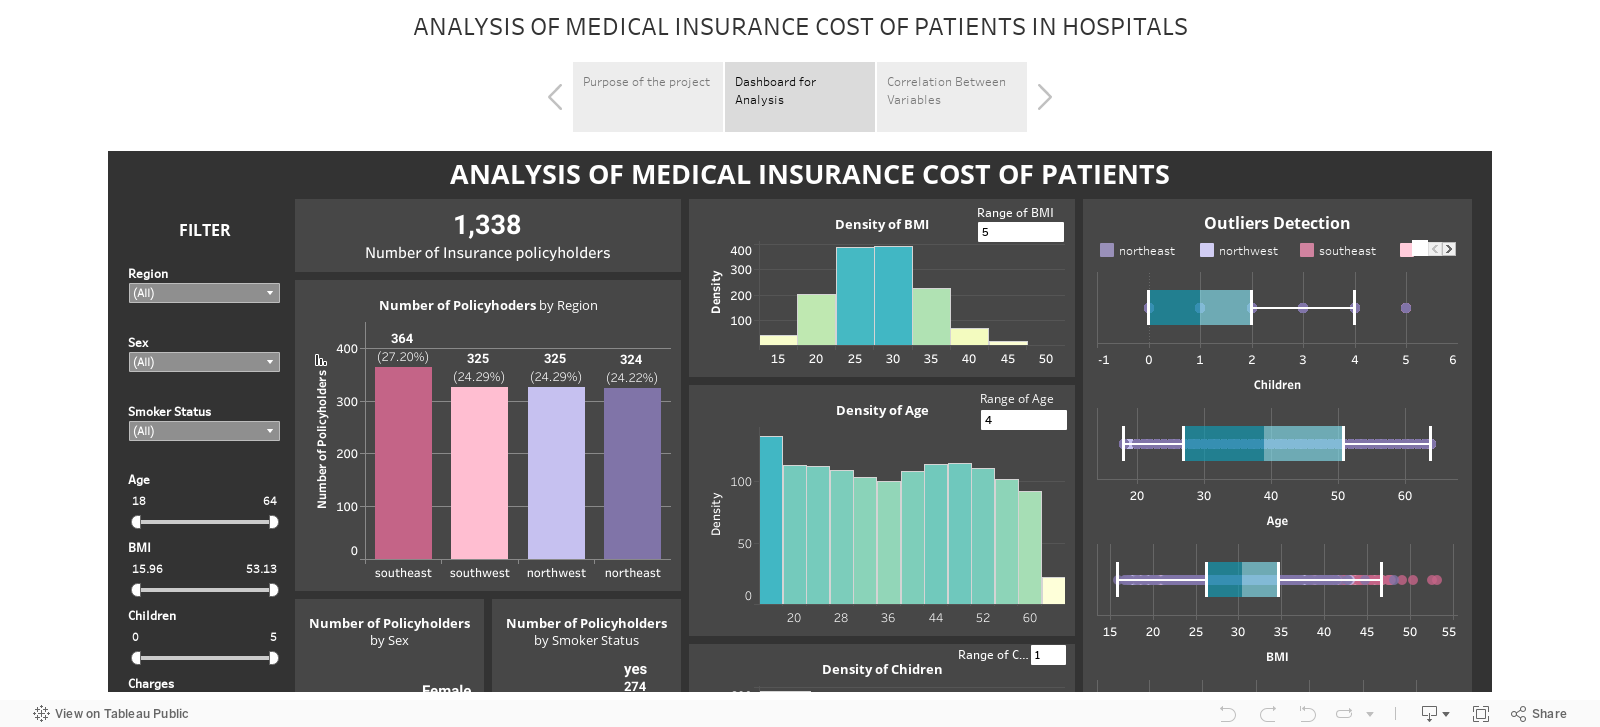 ANALYSIS OF MEDICAL INSURANCE COST OF PATIENTS IN HOSPITALS 